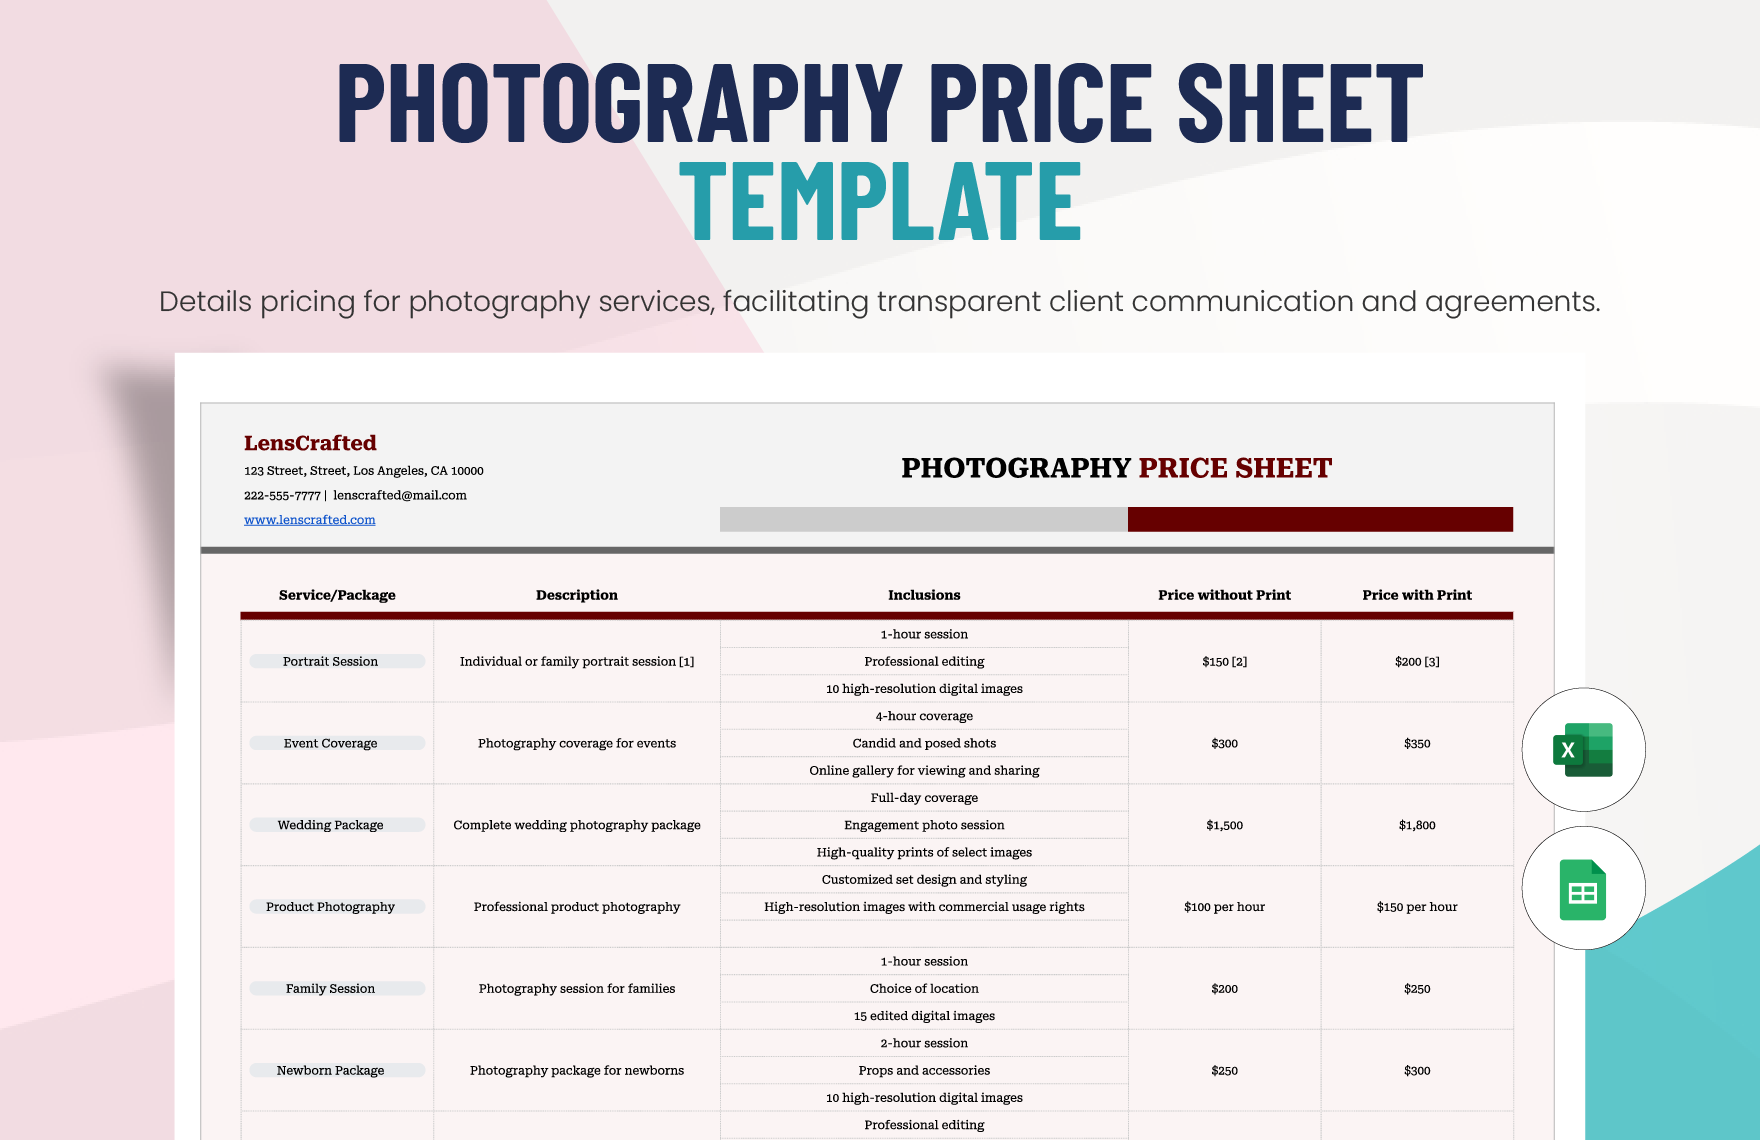 Photography Price Sheet Template in Excel, Google Sheets